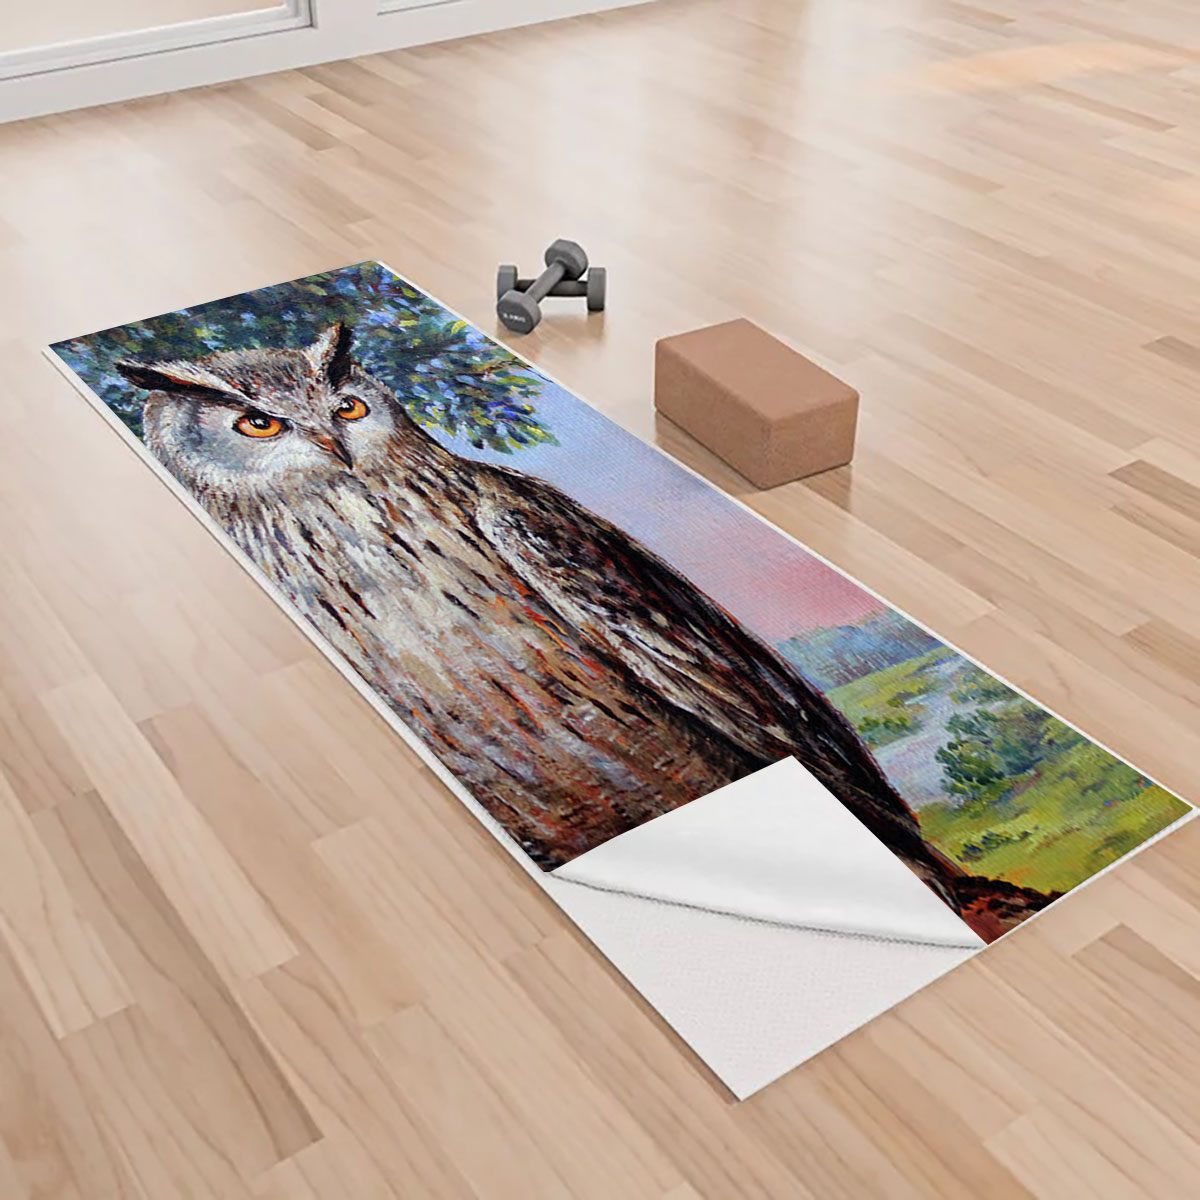 Landscape With Owl Yoga Towels_2_1